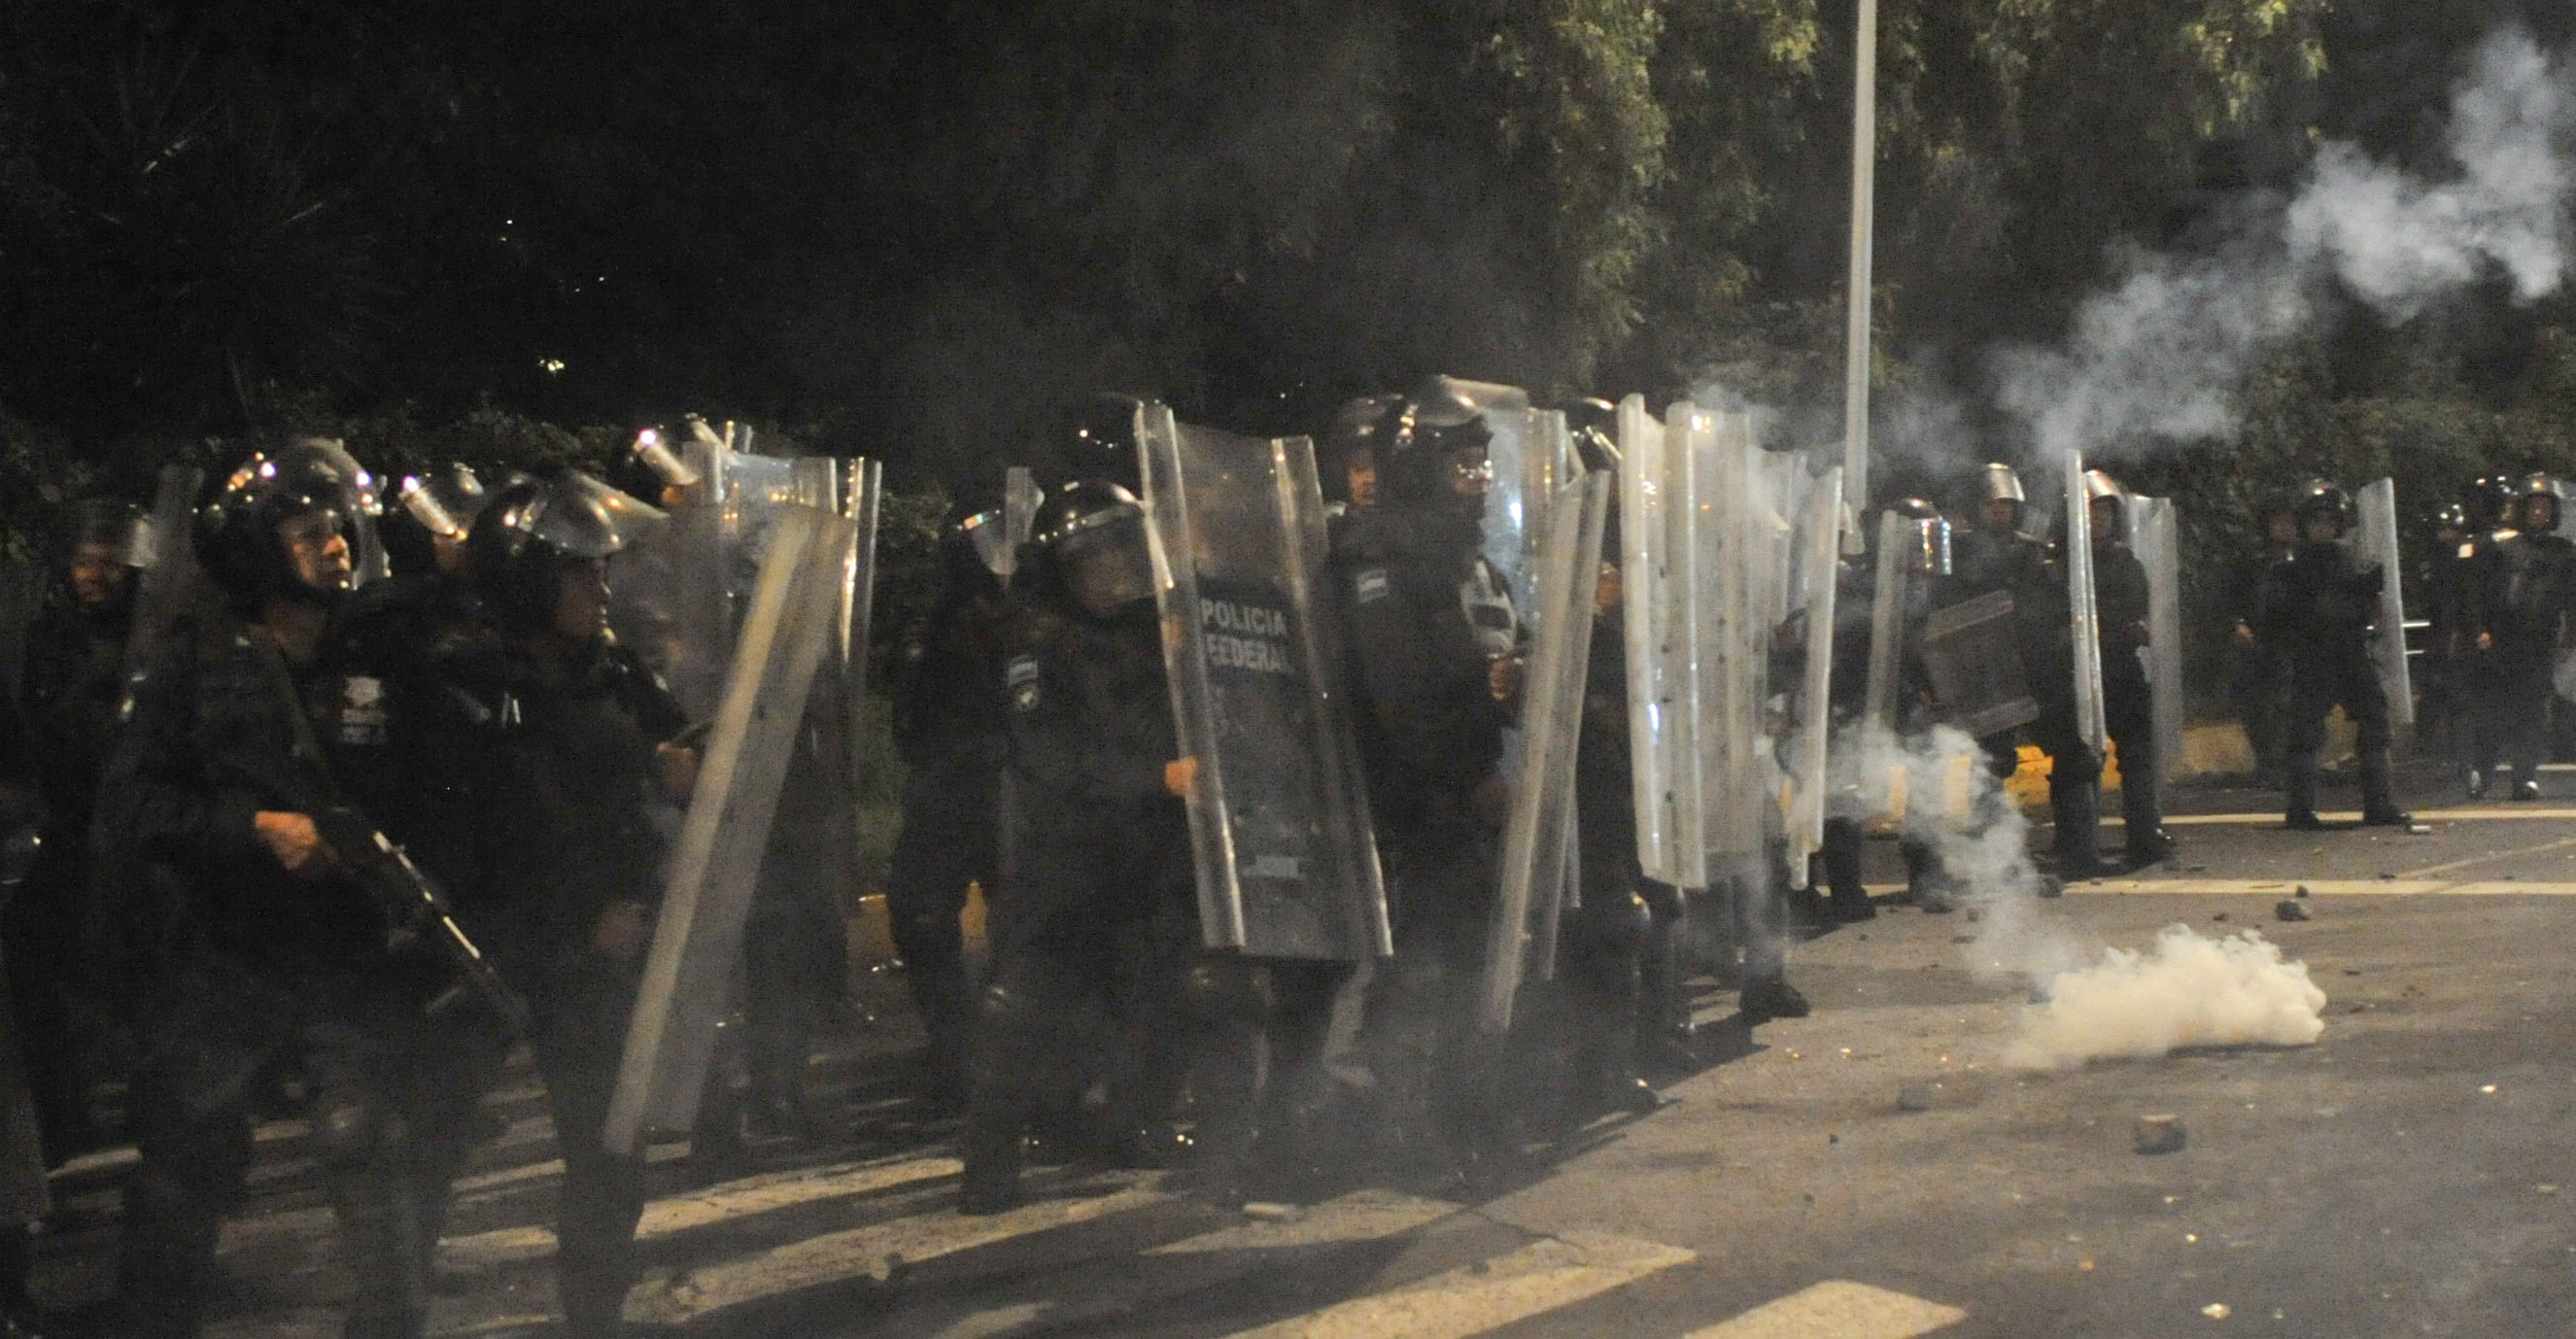 Outside San Juan Ixhuatepec group was that attacked Federal Police